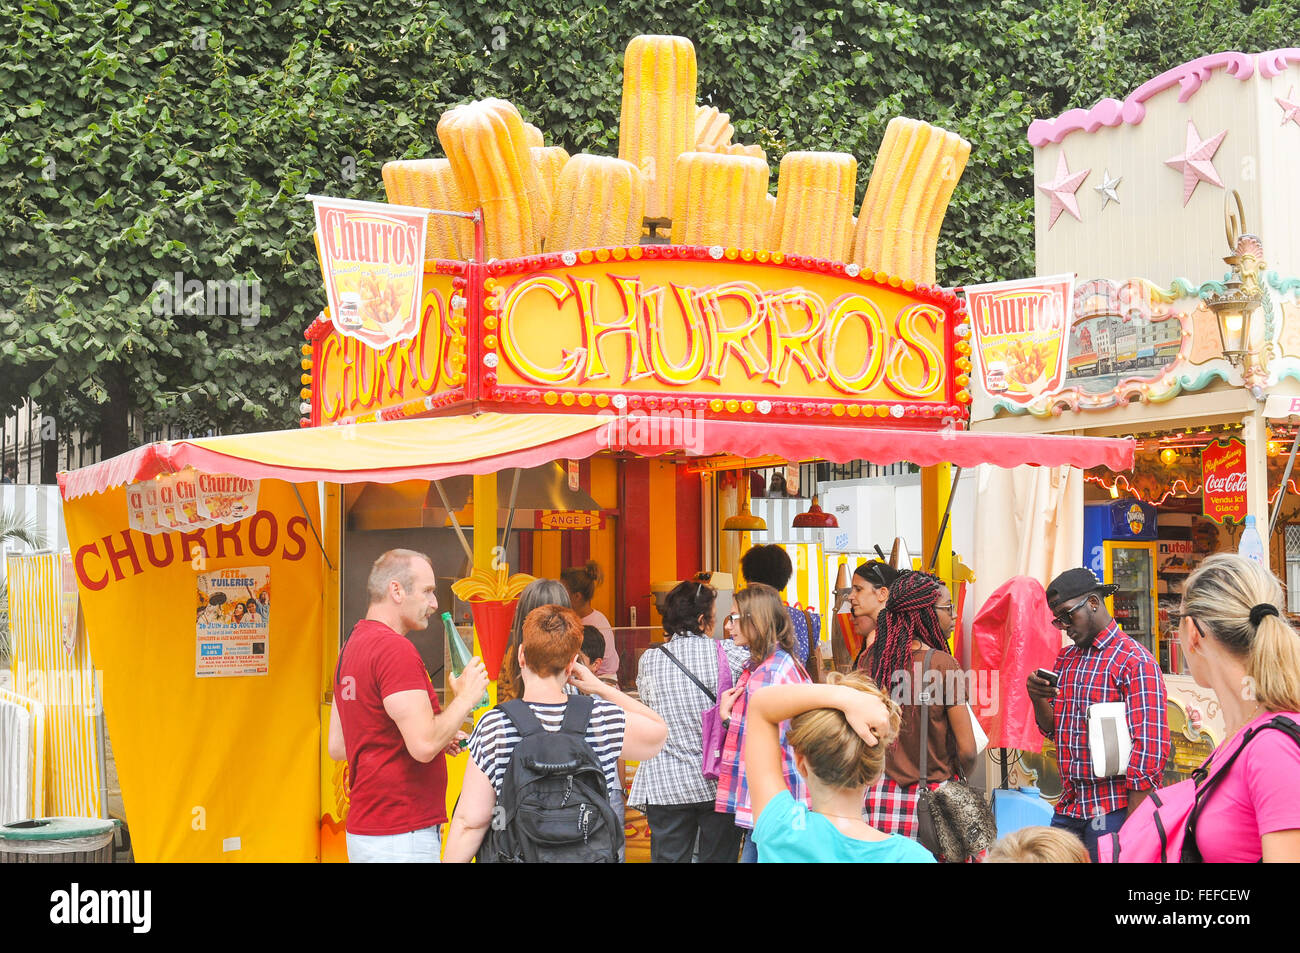 Paris, France - July 9, 2015: Tourists buy traditional churros at kiosk in Jardin des Tuileries, Paris Stock Photo